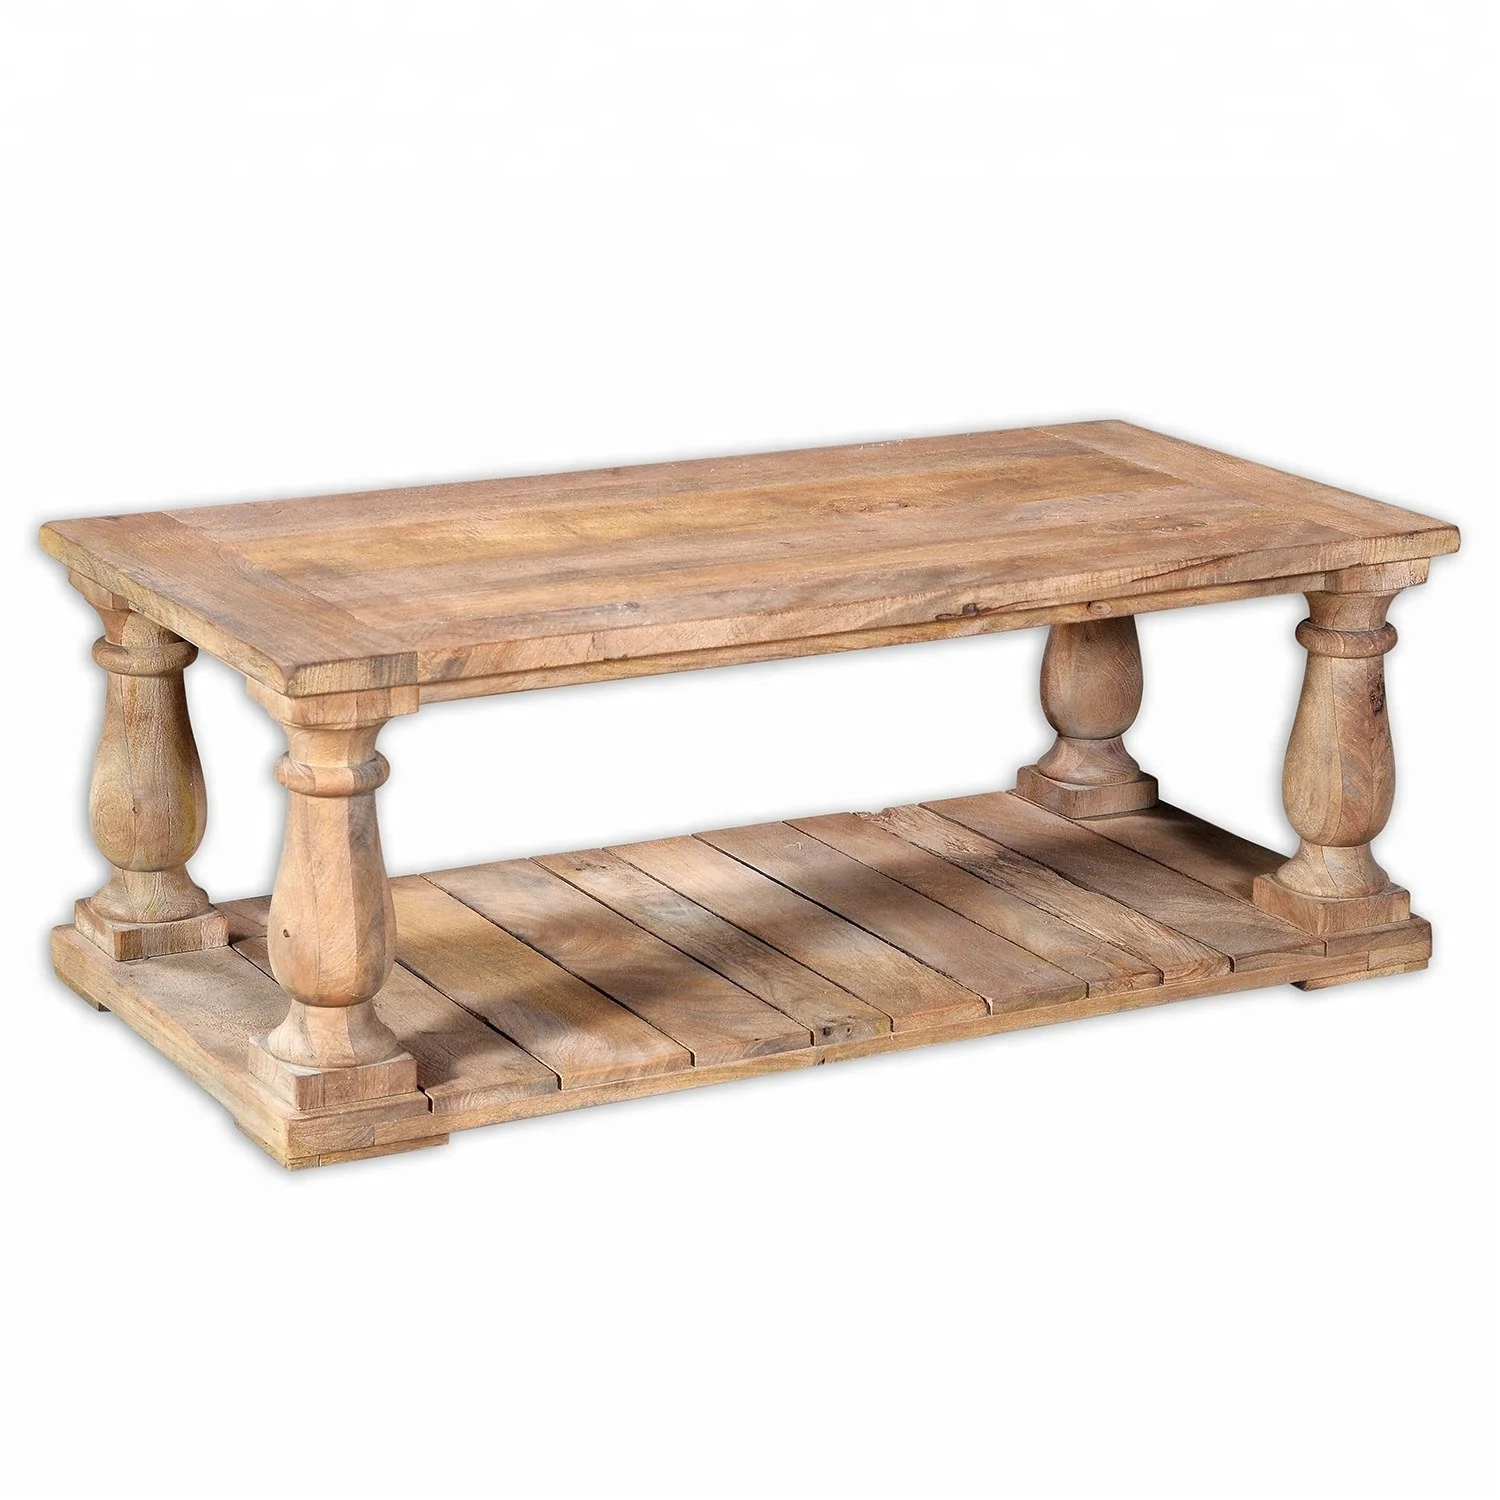 Medieval Wooden Coffee Buy Wooden Coffee Table